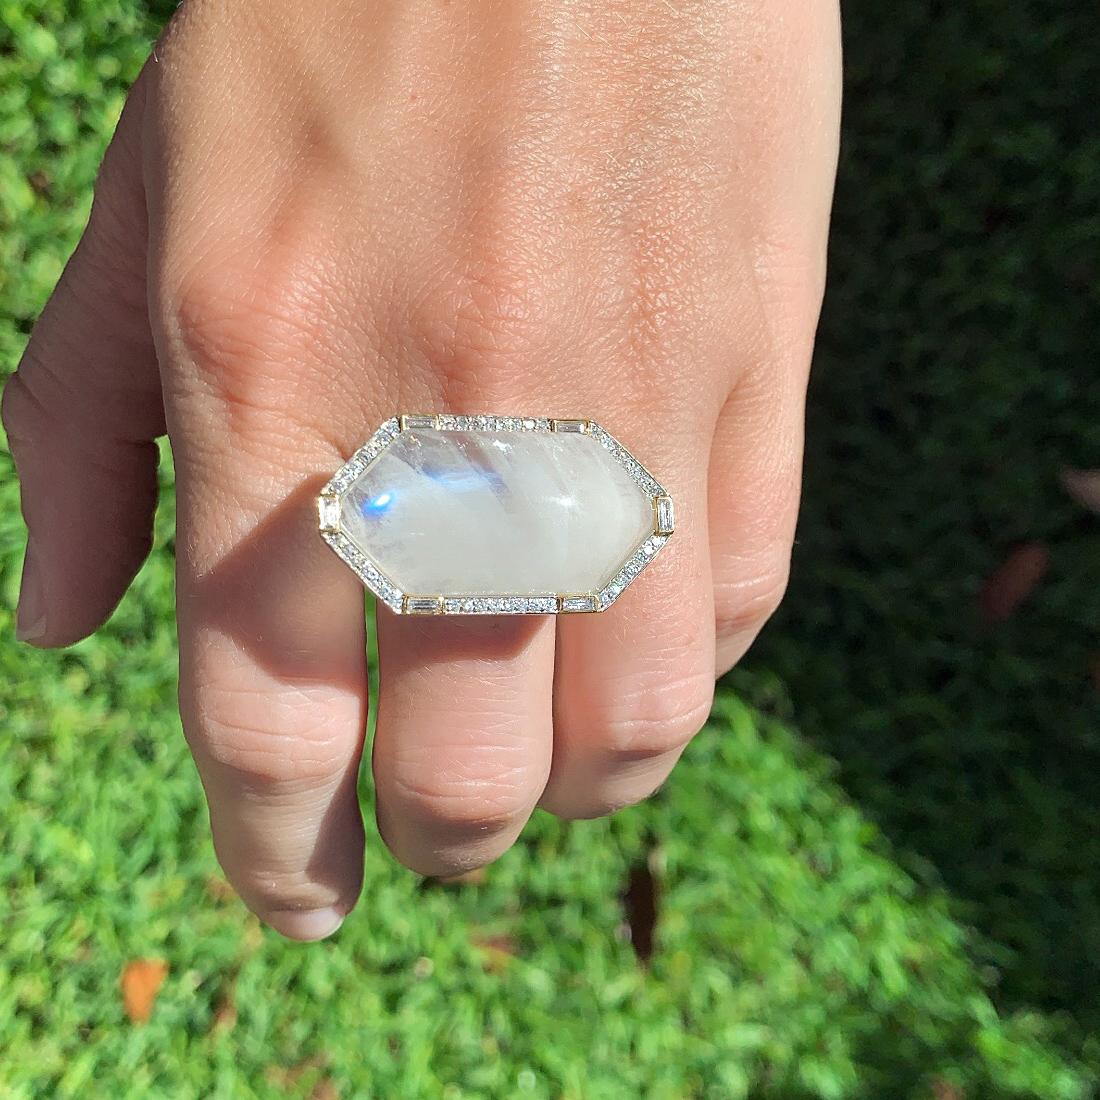 Statement Ring by jewelry designer Liza Beth featuring an oversized, glowing moonstone cabochon surrounded by full-cut diamonds set in satin-finished sterling silver and beautifully accented by six baguette diamonds bezel-set in 14k yellow gold. The